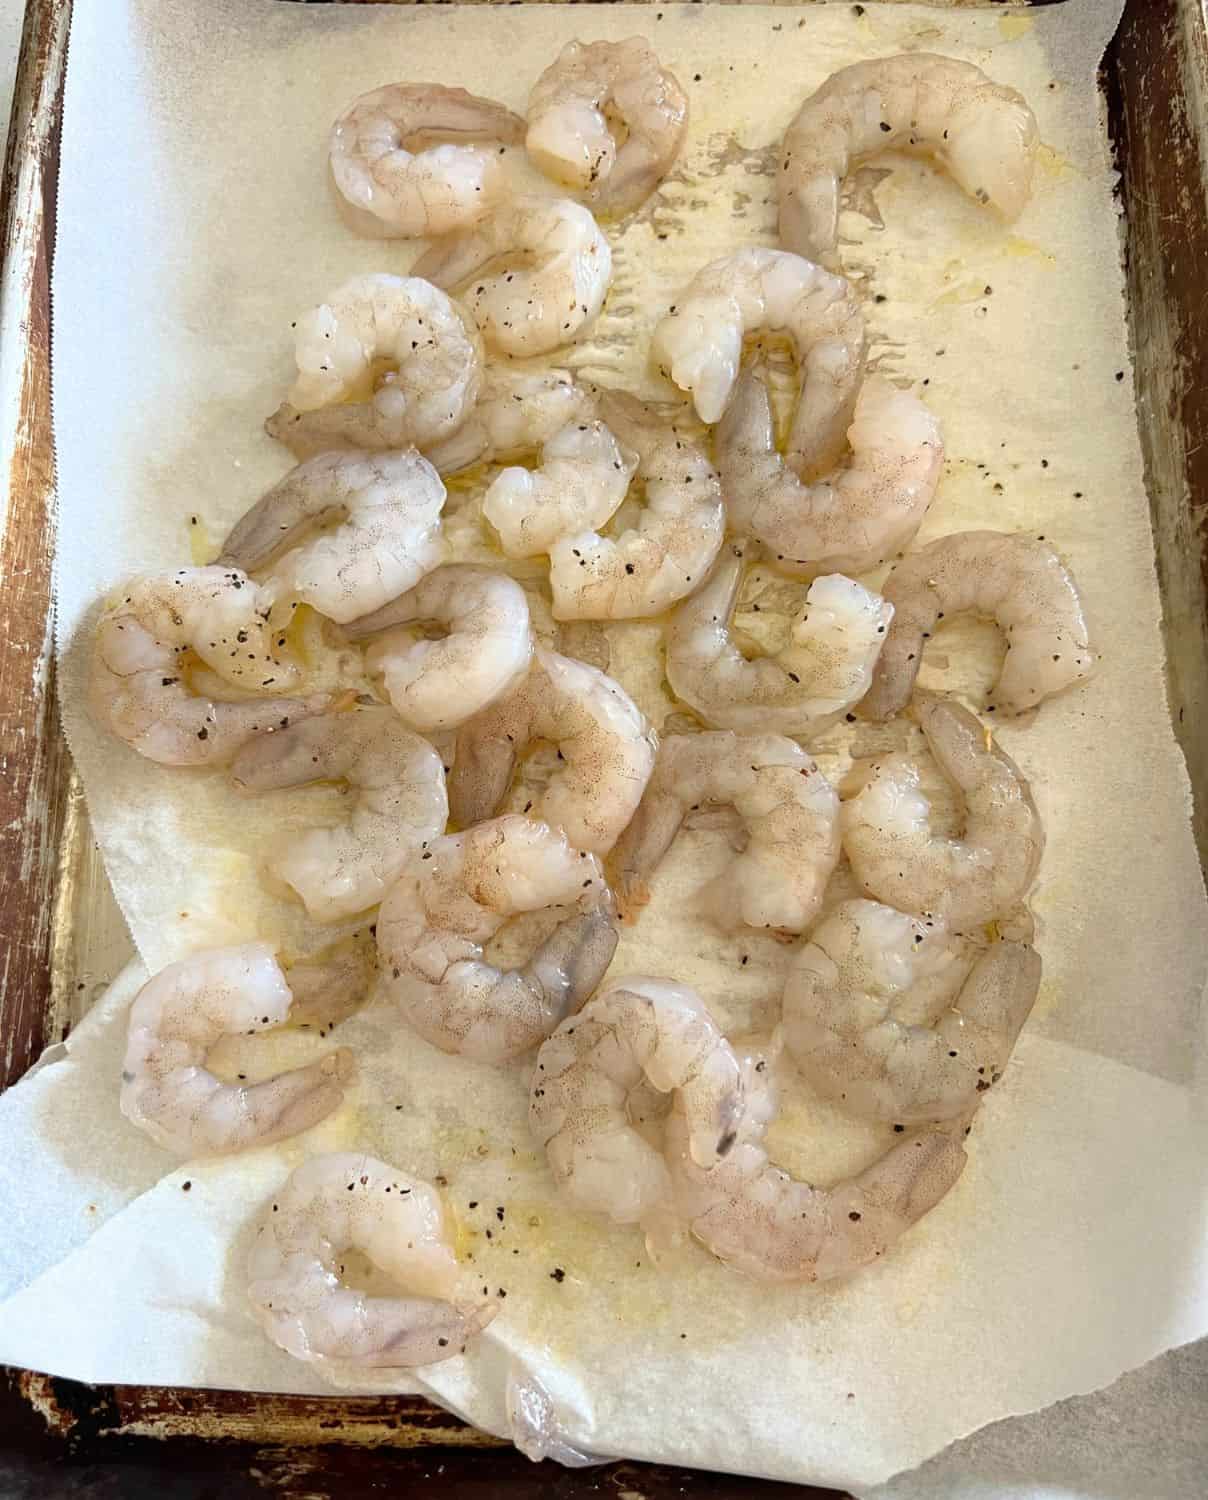 Raw shrimp seasoned with salt and pepper on a lined baking sheet. 